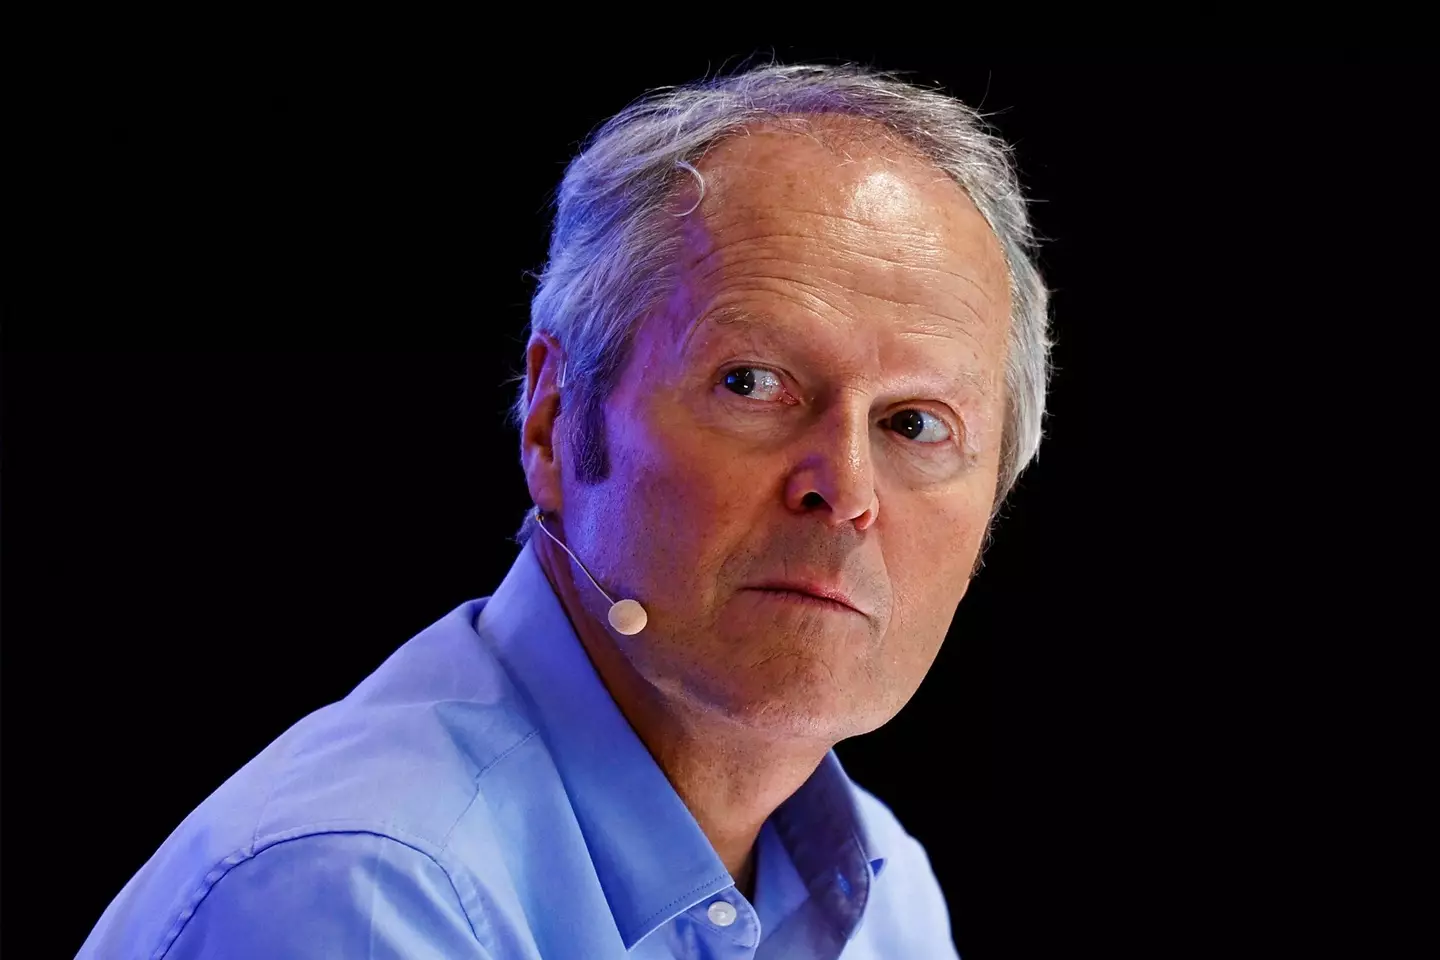 Ubisoft CEO Yves Guillemot has announced a change in price for the company's games.